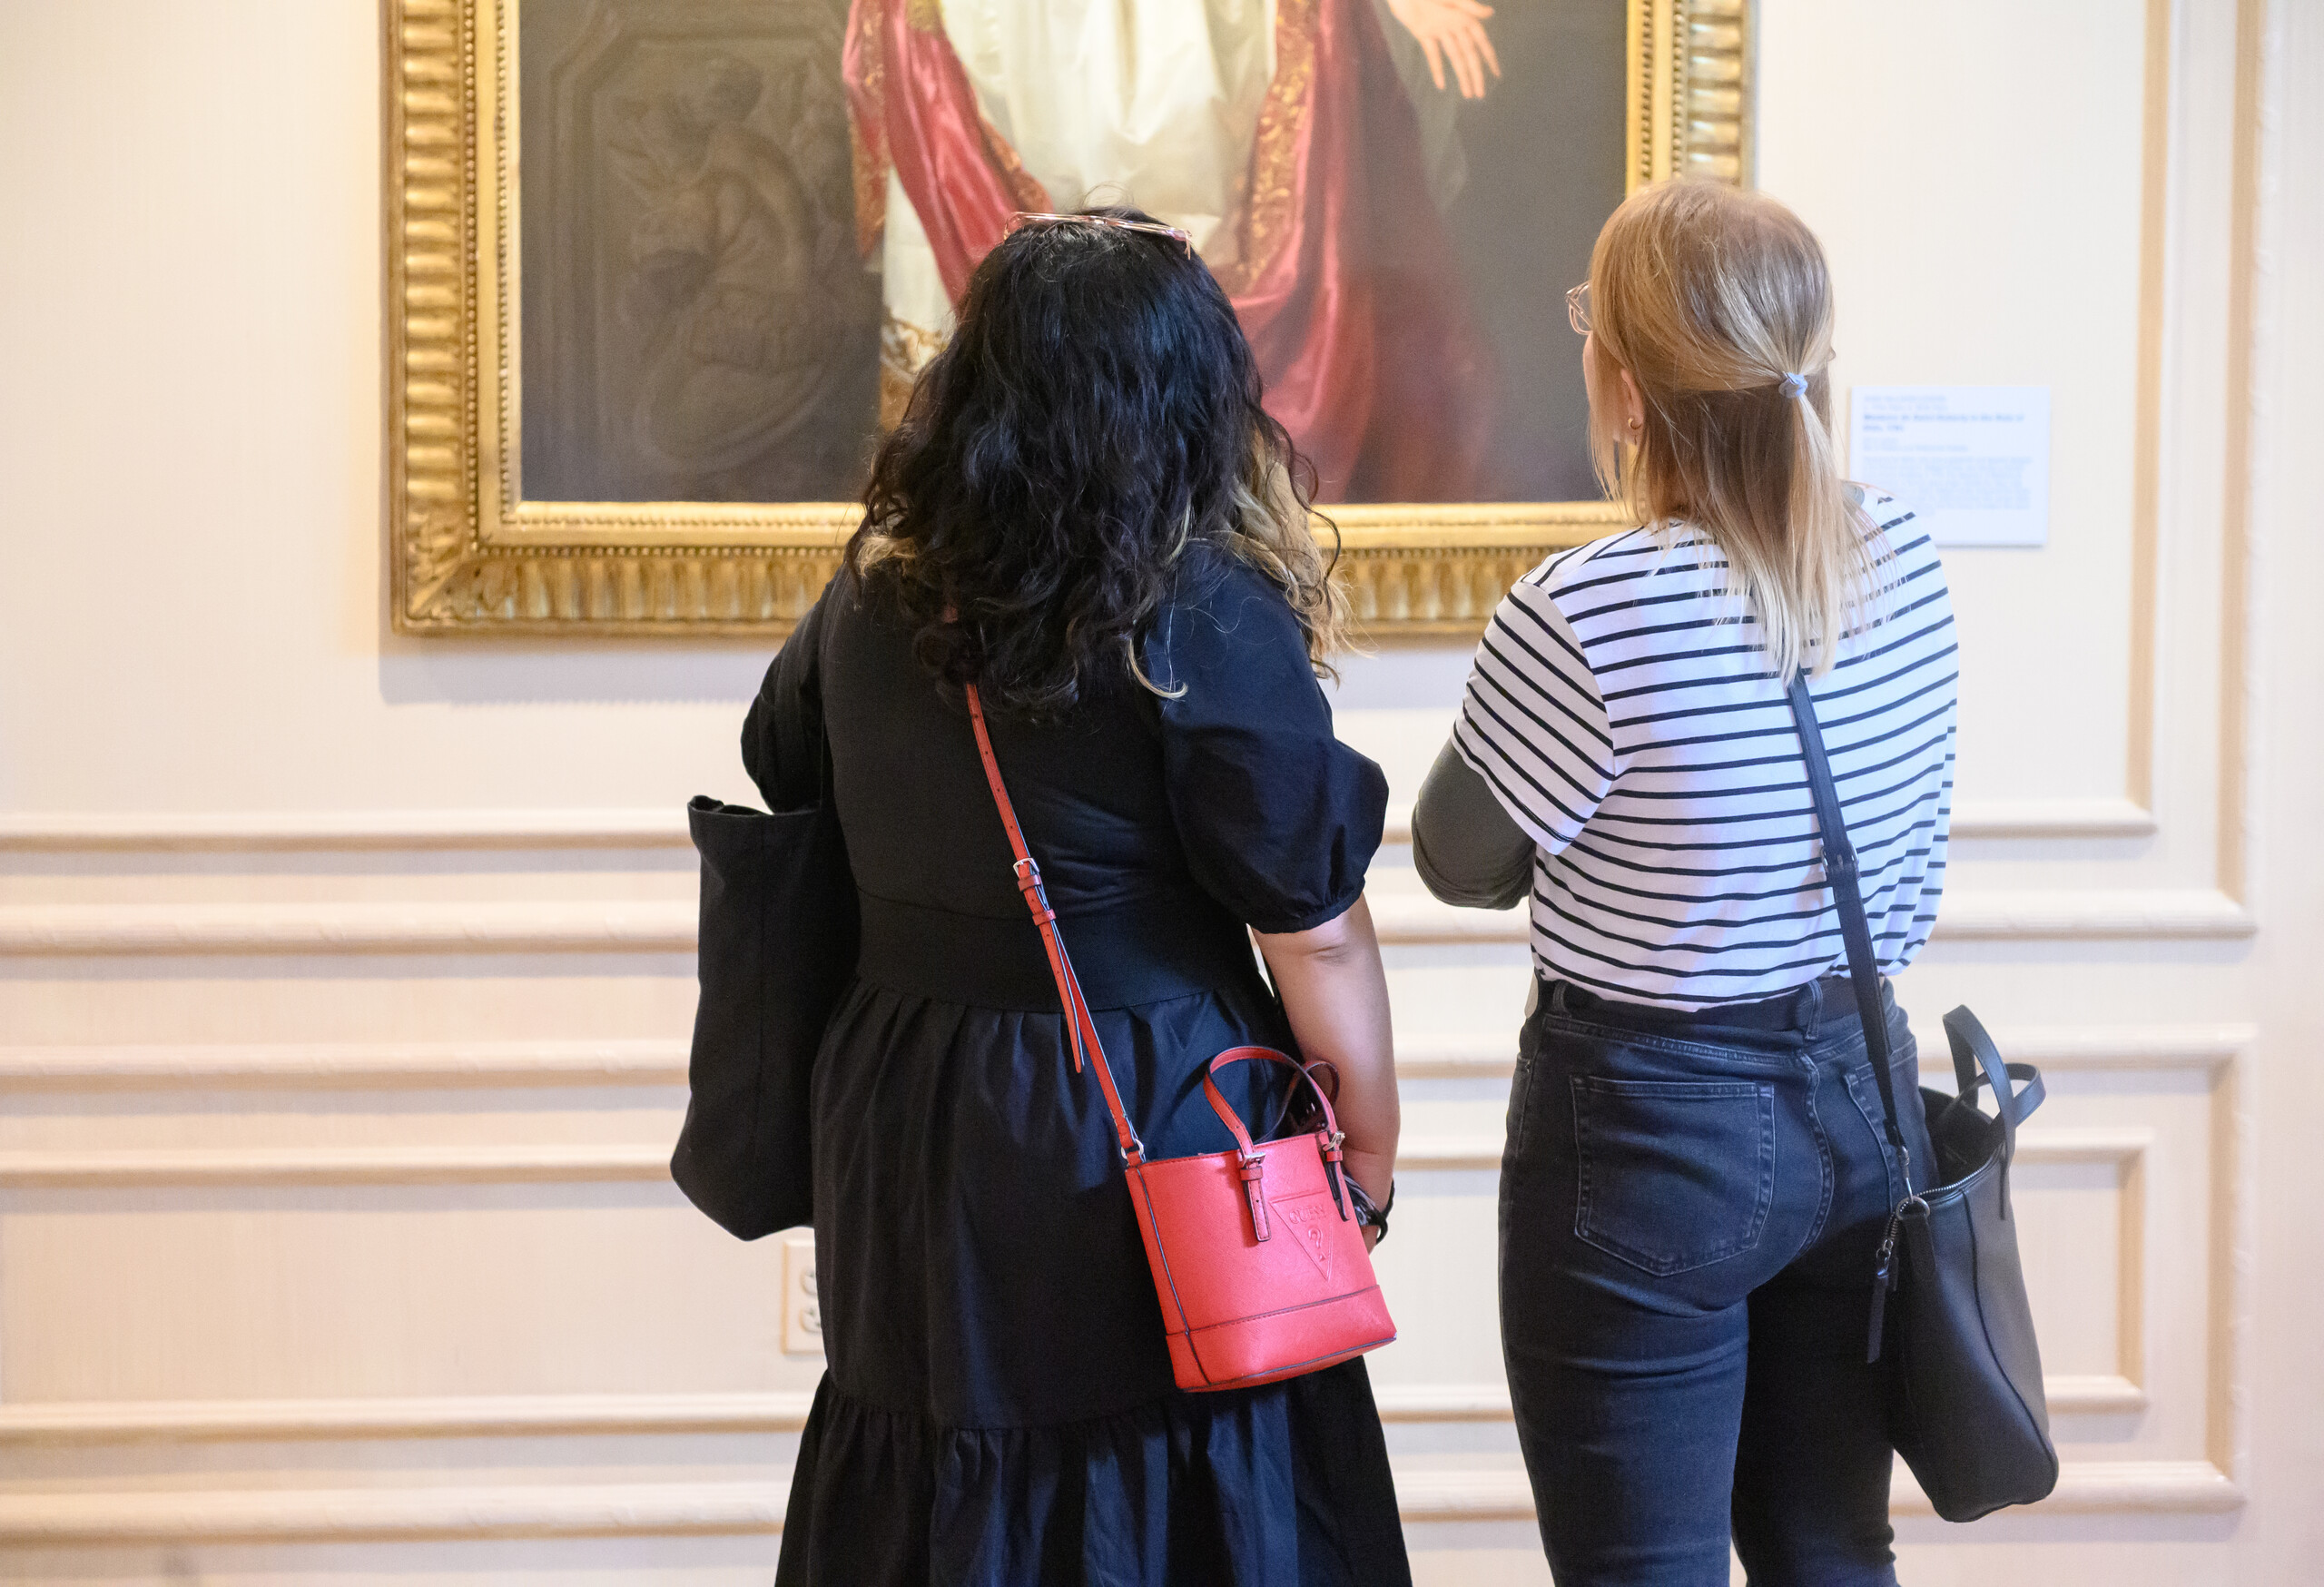 Two individuals look closely at a painting in museum gallery.